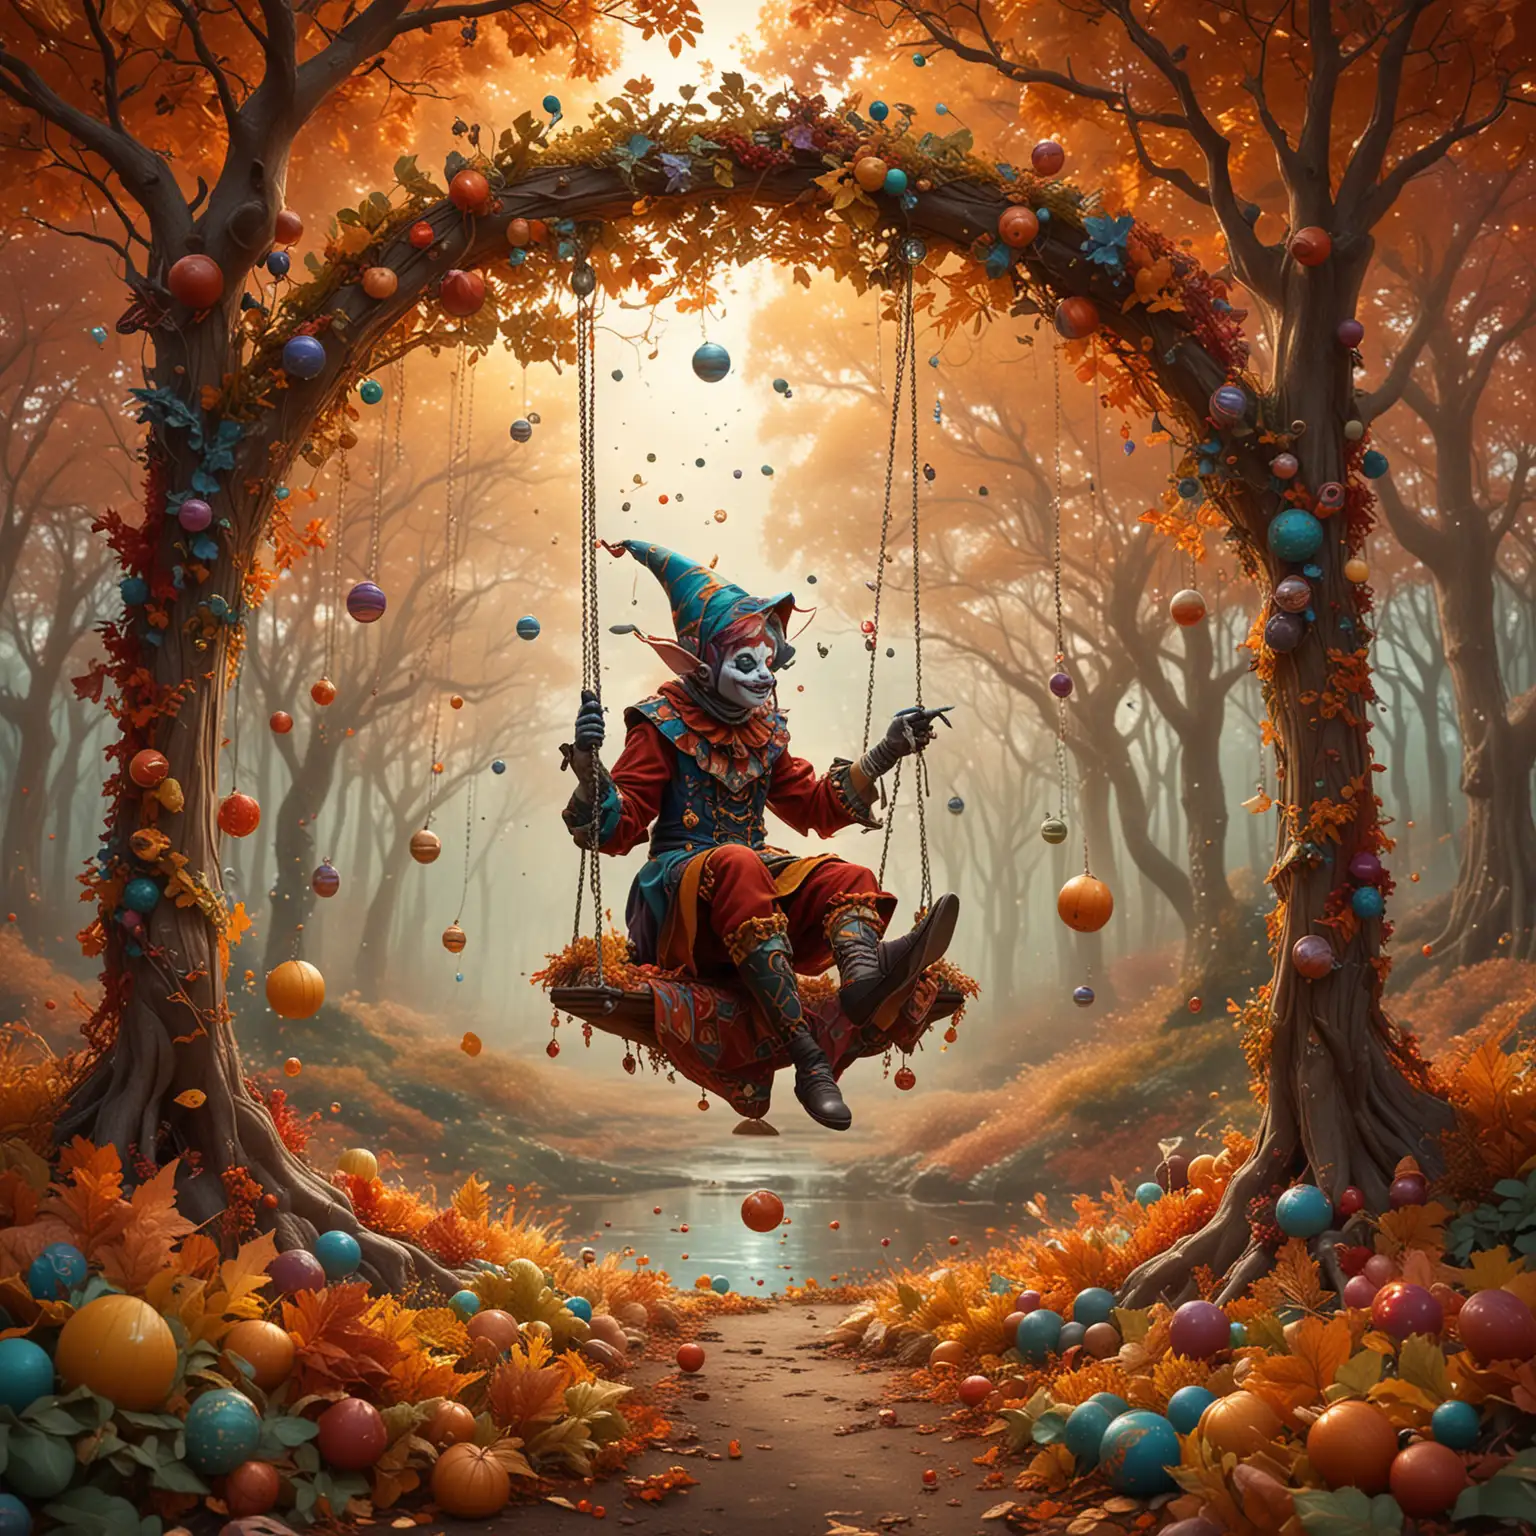 Surreal Autumn Jester Swing in Chris B Style